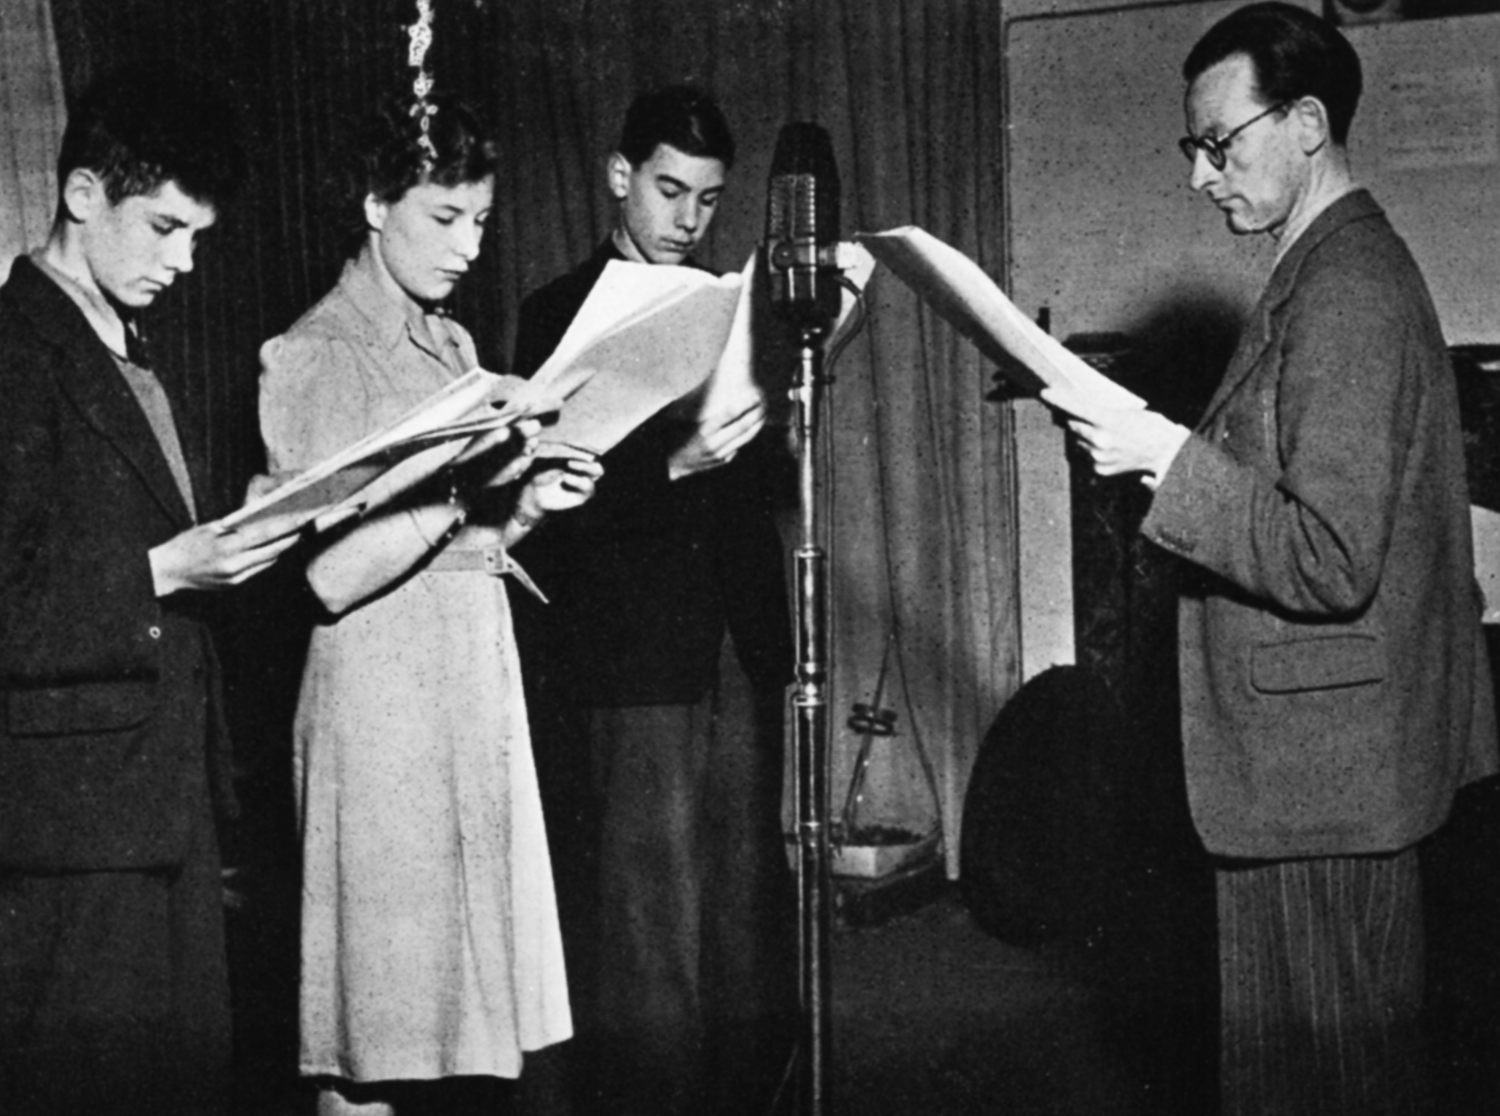 Four people hold scripts around a microphone